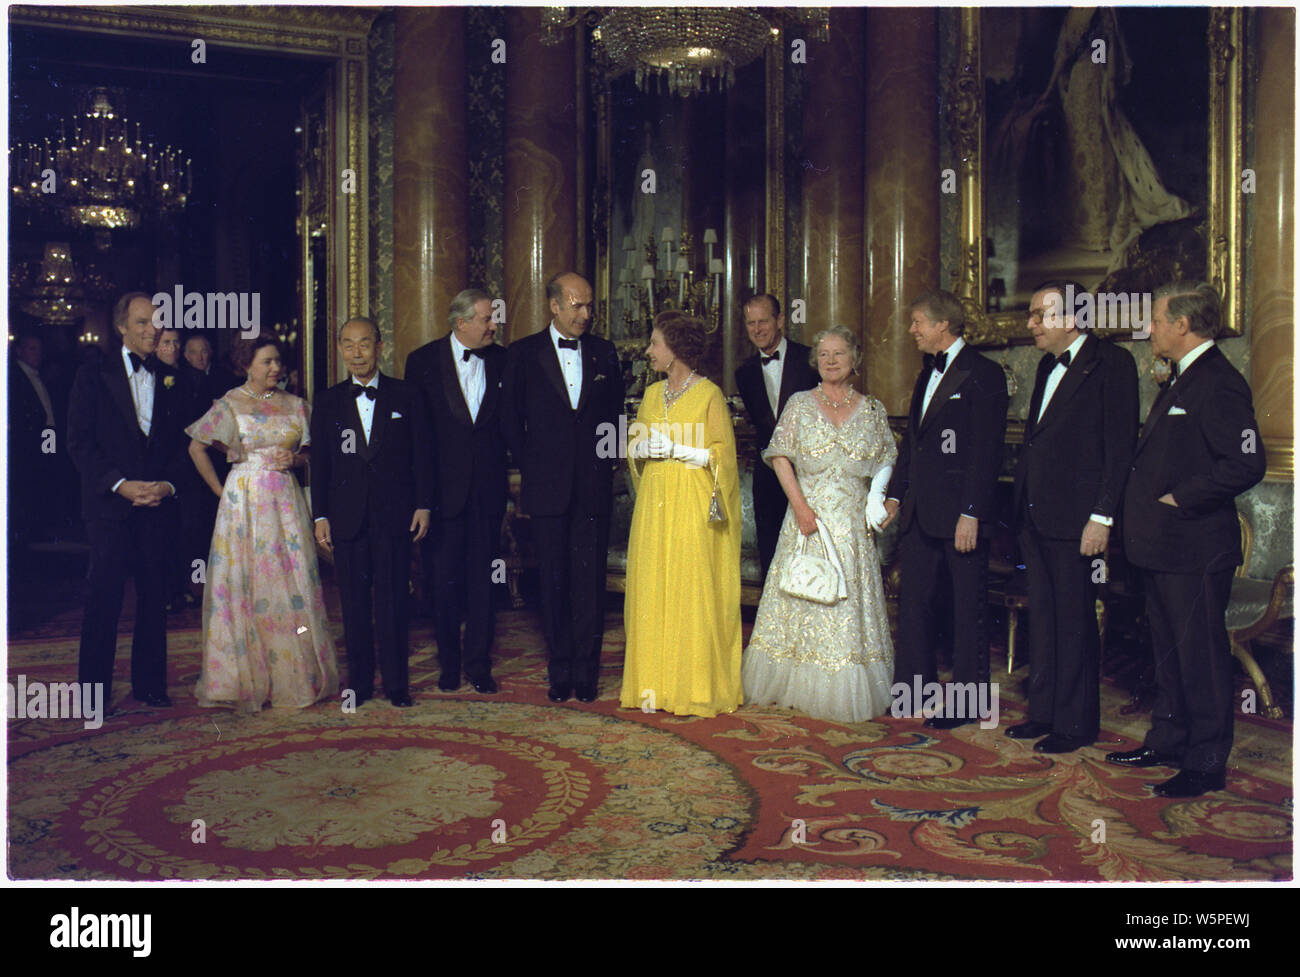 Scope and content:  National leaders and royalty in London, 1977. Left to right: Pierre Trudeau, (Prince Charles far background), Princess Margaret, Takeo Fukuda, James Callaghan, Valéry Giscard d'Estaing, Queen Elizabeth II, Prince Philip, Queen Elizabeth The Queen Mother, Jimmy Carter, Giulio Andreotti, Helmut Schmidt General notes:  Part of the 1977 G7 meeting Stock Photo